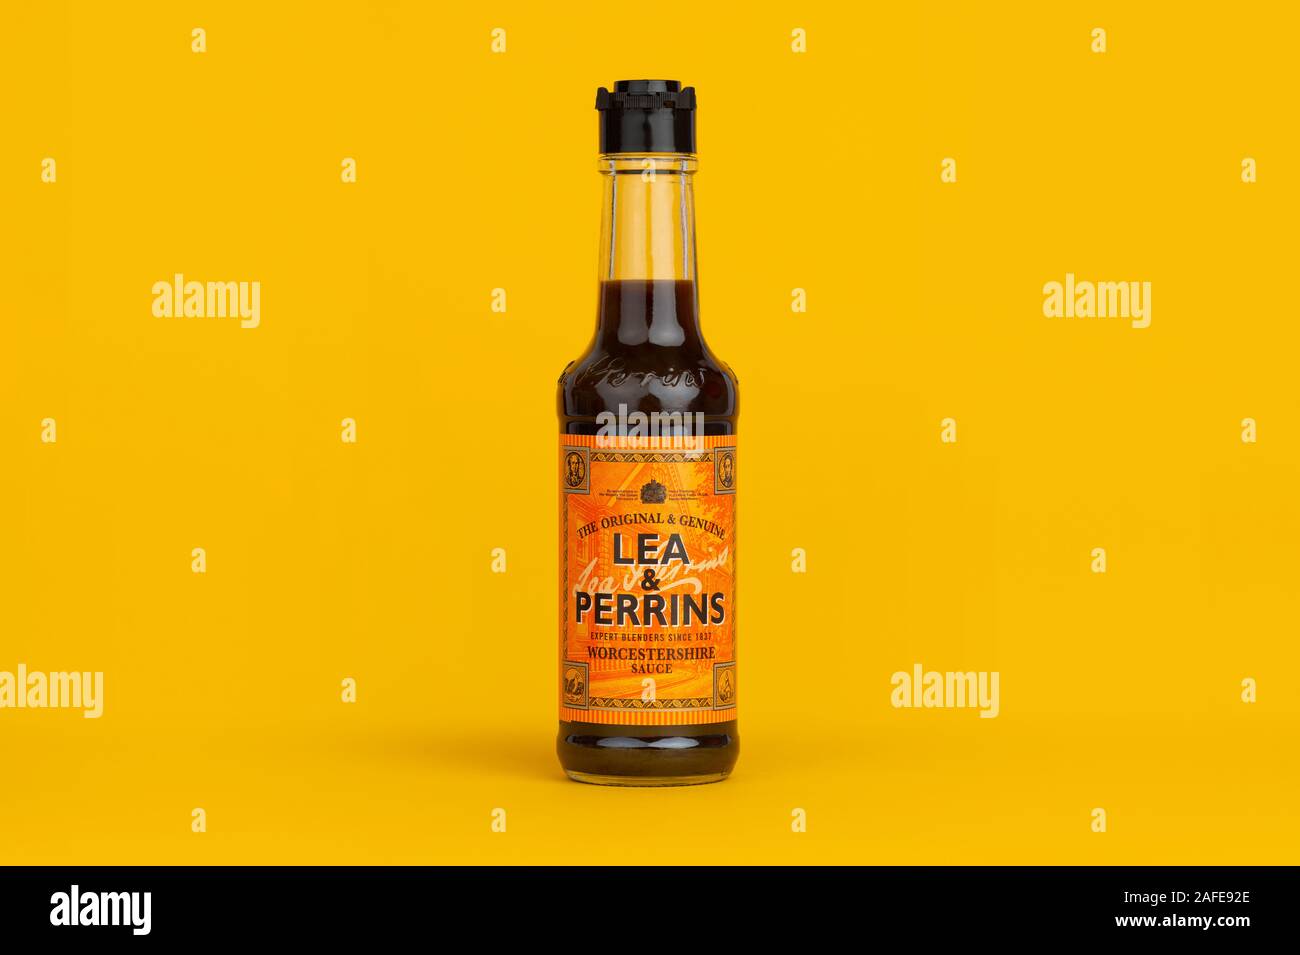 A bottle of Lea & Perrins Worcestershire sauce shot on a yellow background. Stock Photo